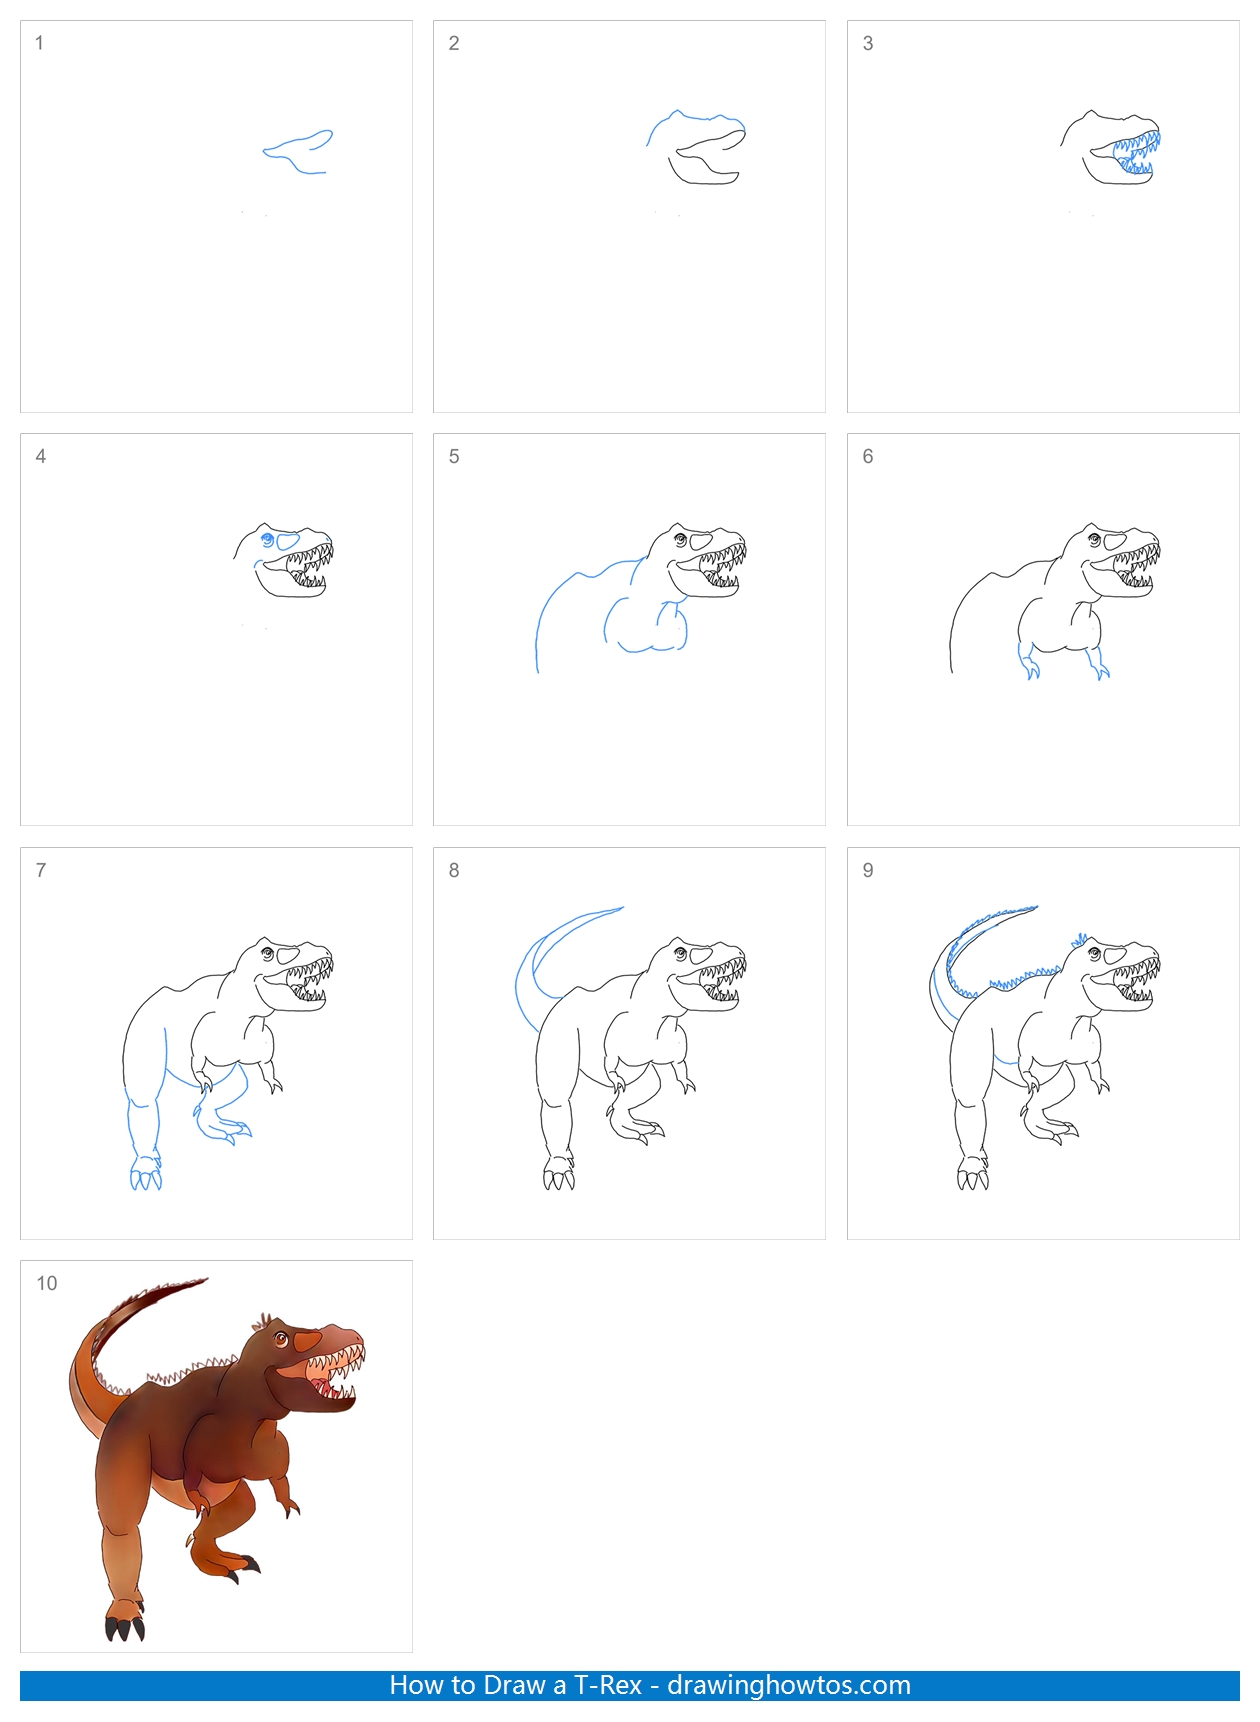 How to Draw a T-Rex Easy Step by Step